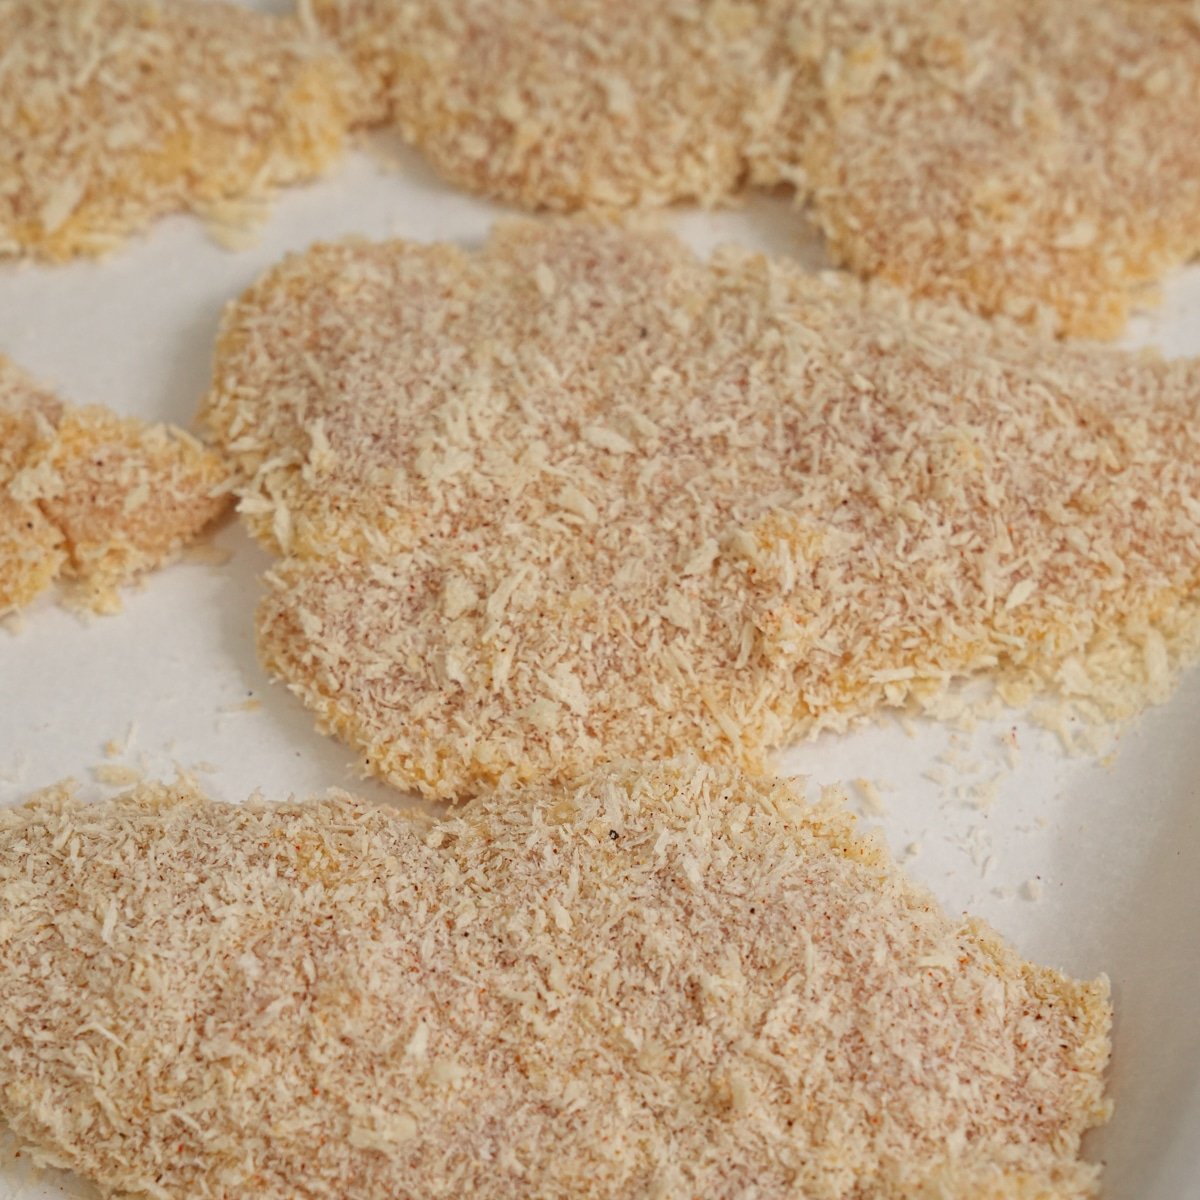 Breaded chicken tenders laying on a parchment paper lined baking sheet.